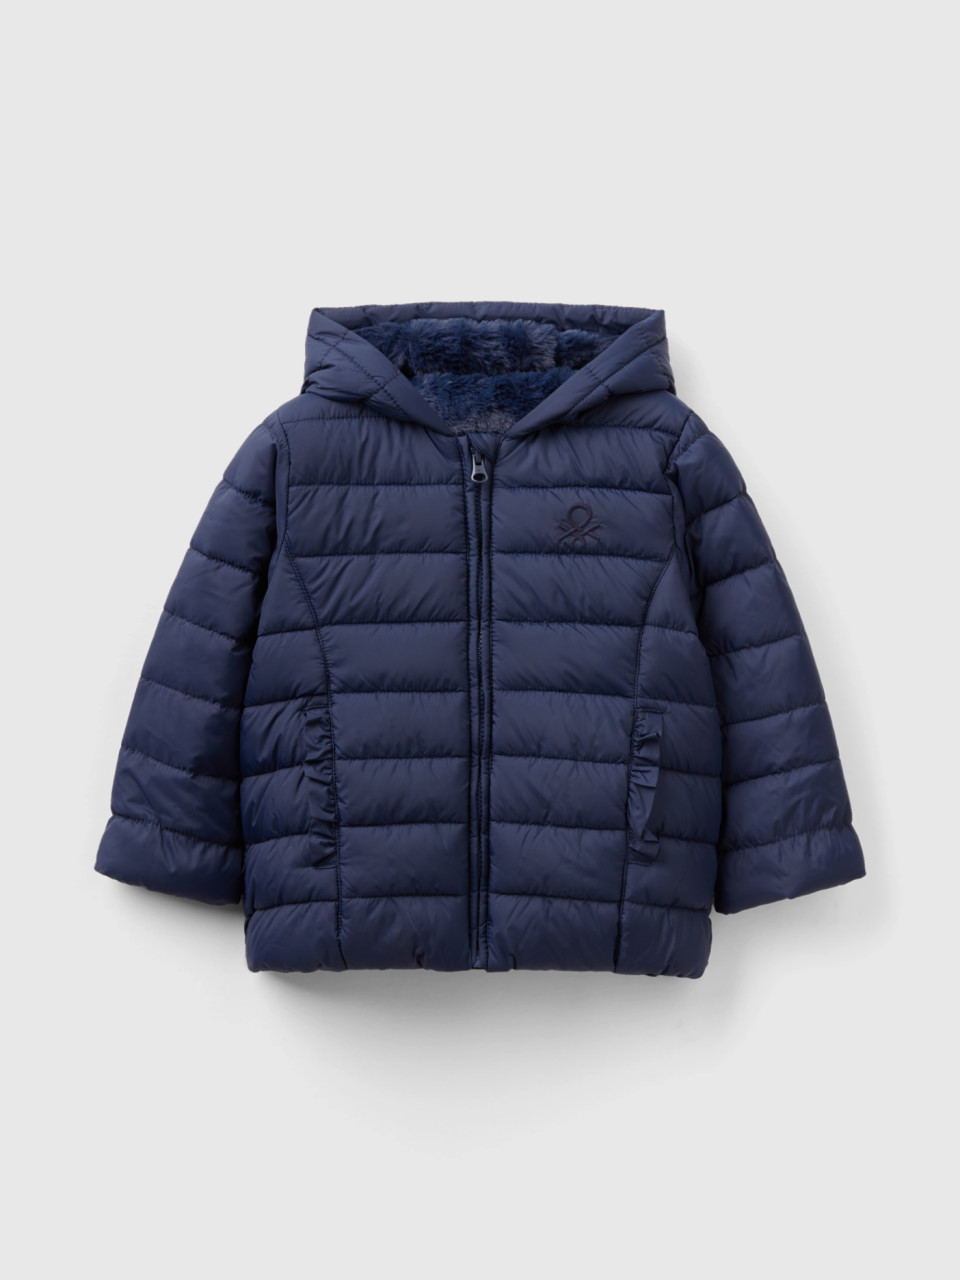 Benetton, Padded Jacket With Rouches, Dark Blue, Kids